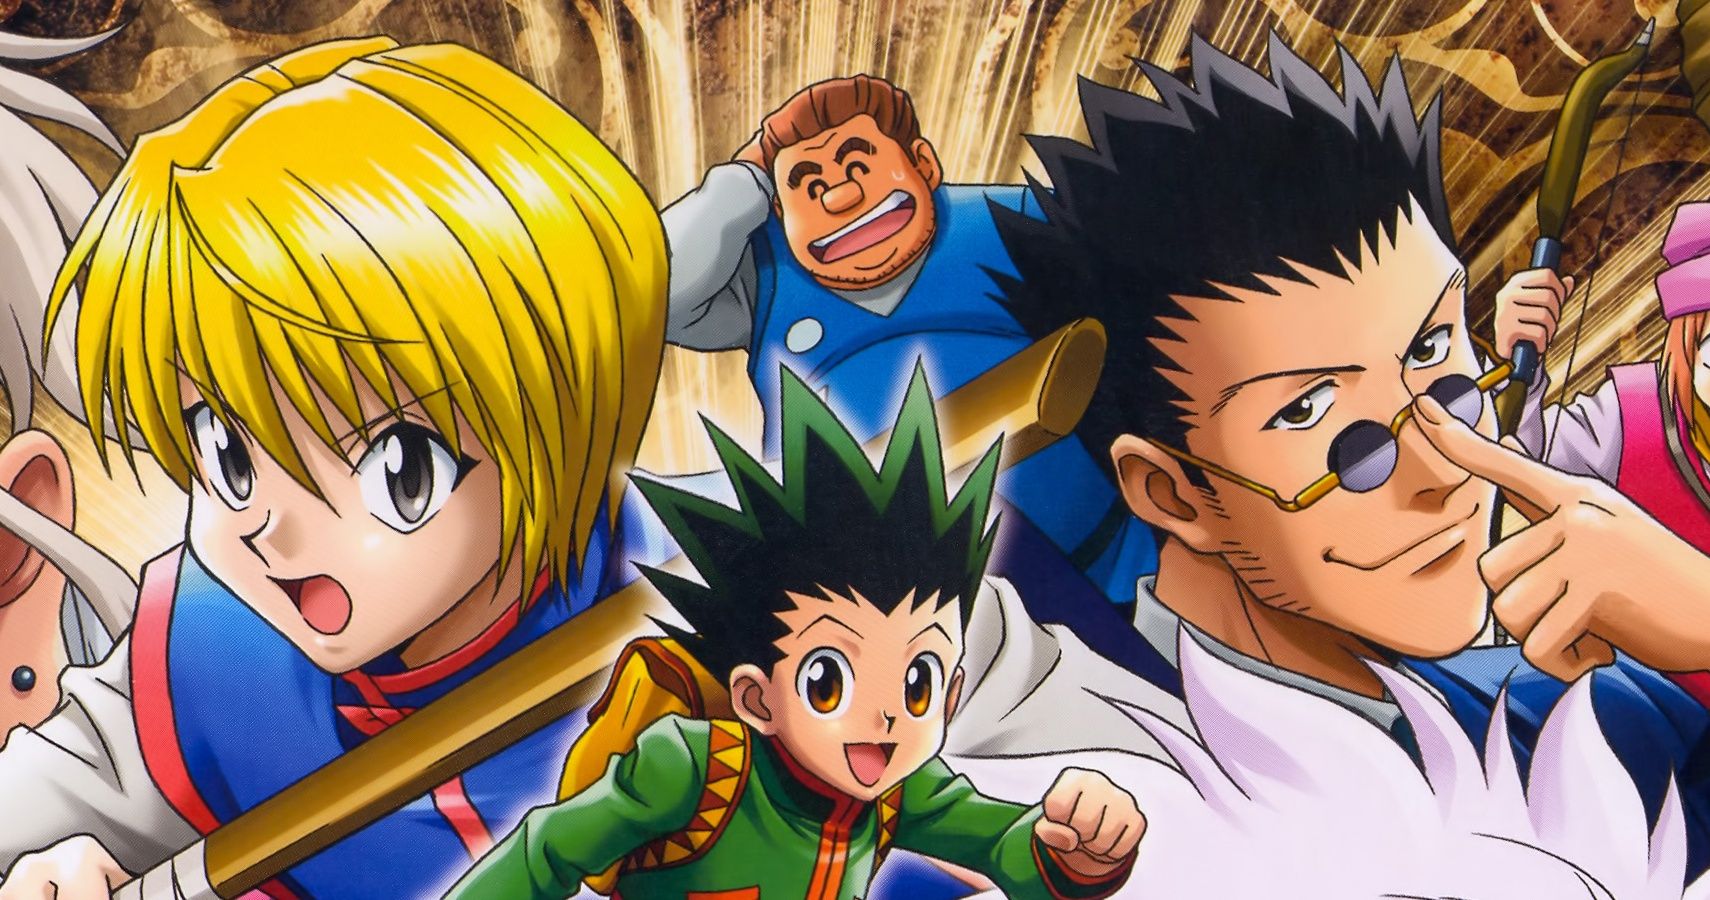 10 Hunter x Hunter Characters We Wanted To See More Of In The Anime